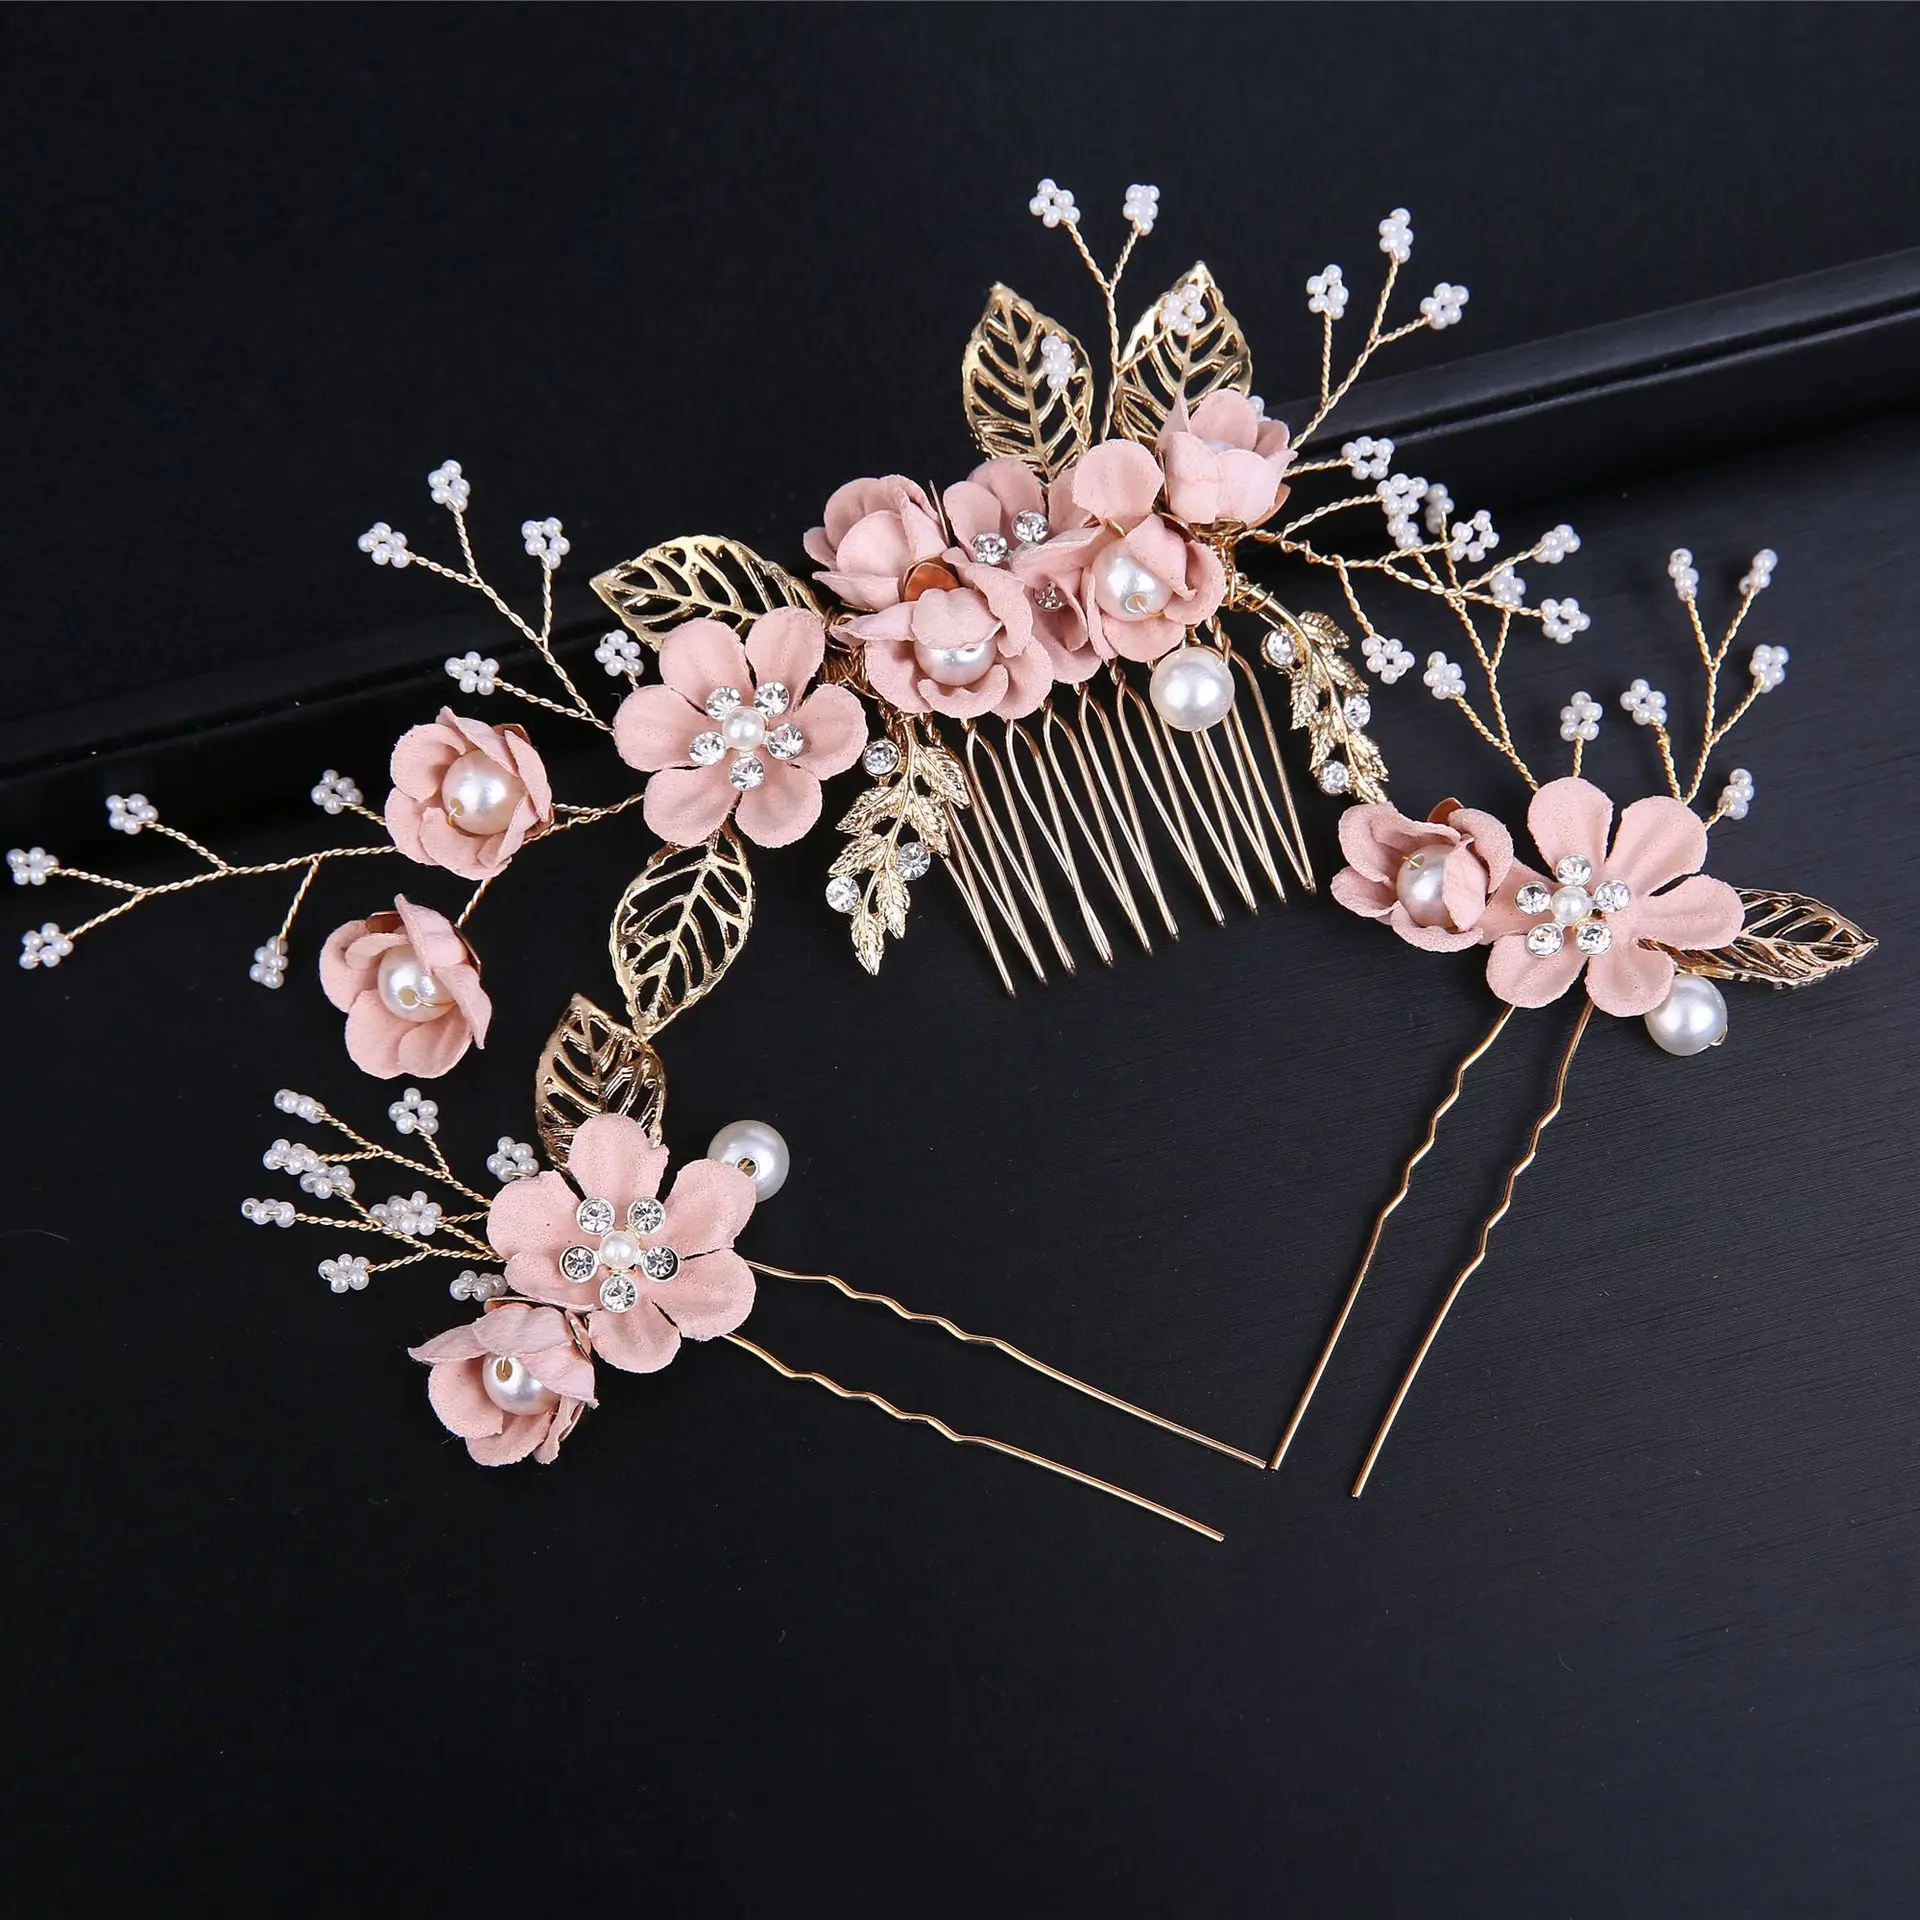 

3pcs Flower Bride Hair Comb Alloy Hair Jewelry For Women Headpieces Pearl Side Combs With 2 Hairpins For Wedding Accessories